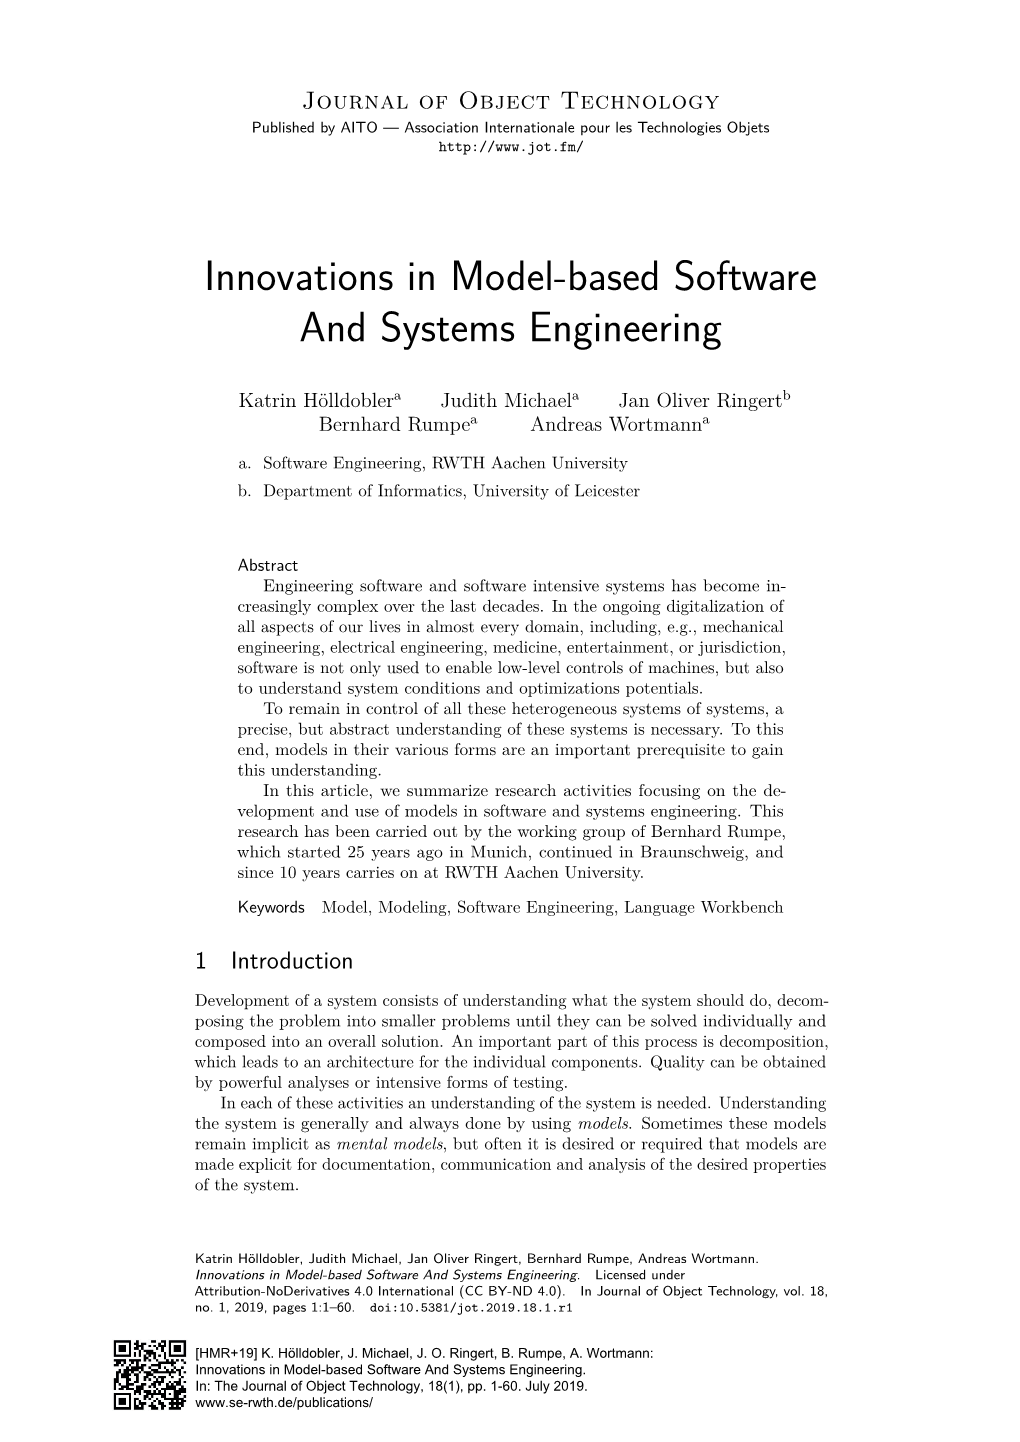 Innovations in Model-Based Software and Systems Engineering. Licensed Under Attribution-Noderivatives 4.0 International (CC BY-ND 4.0)